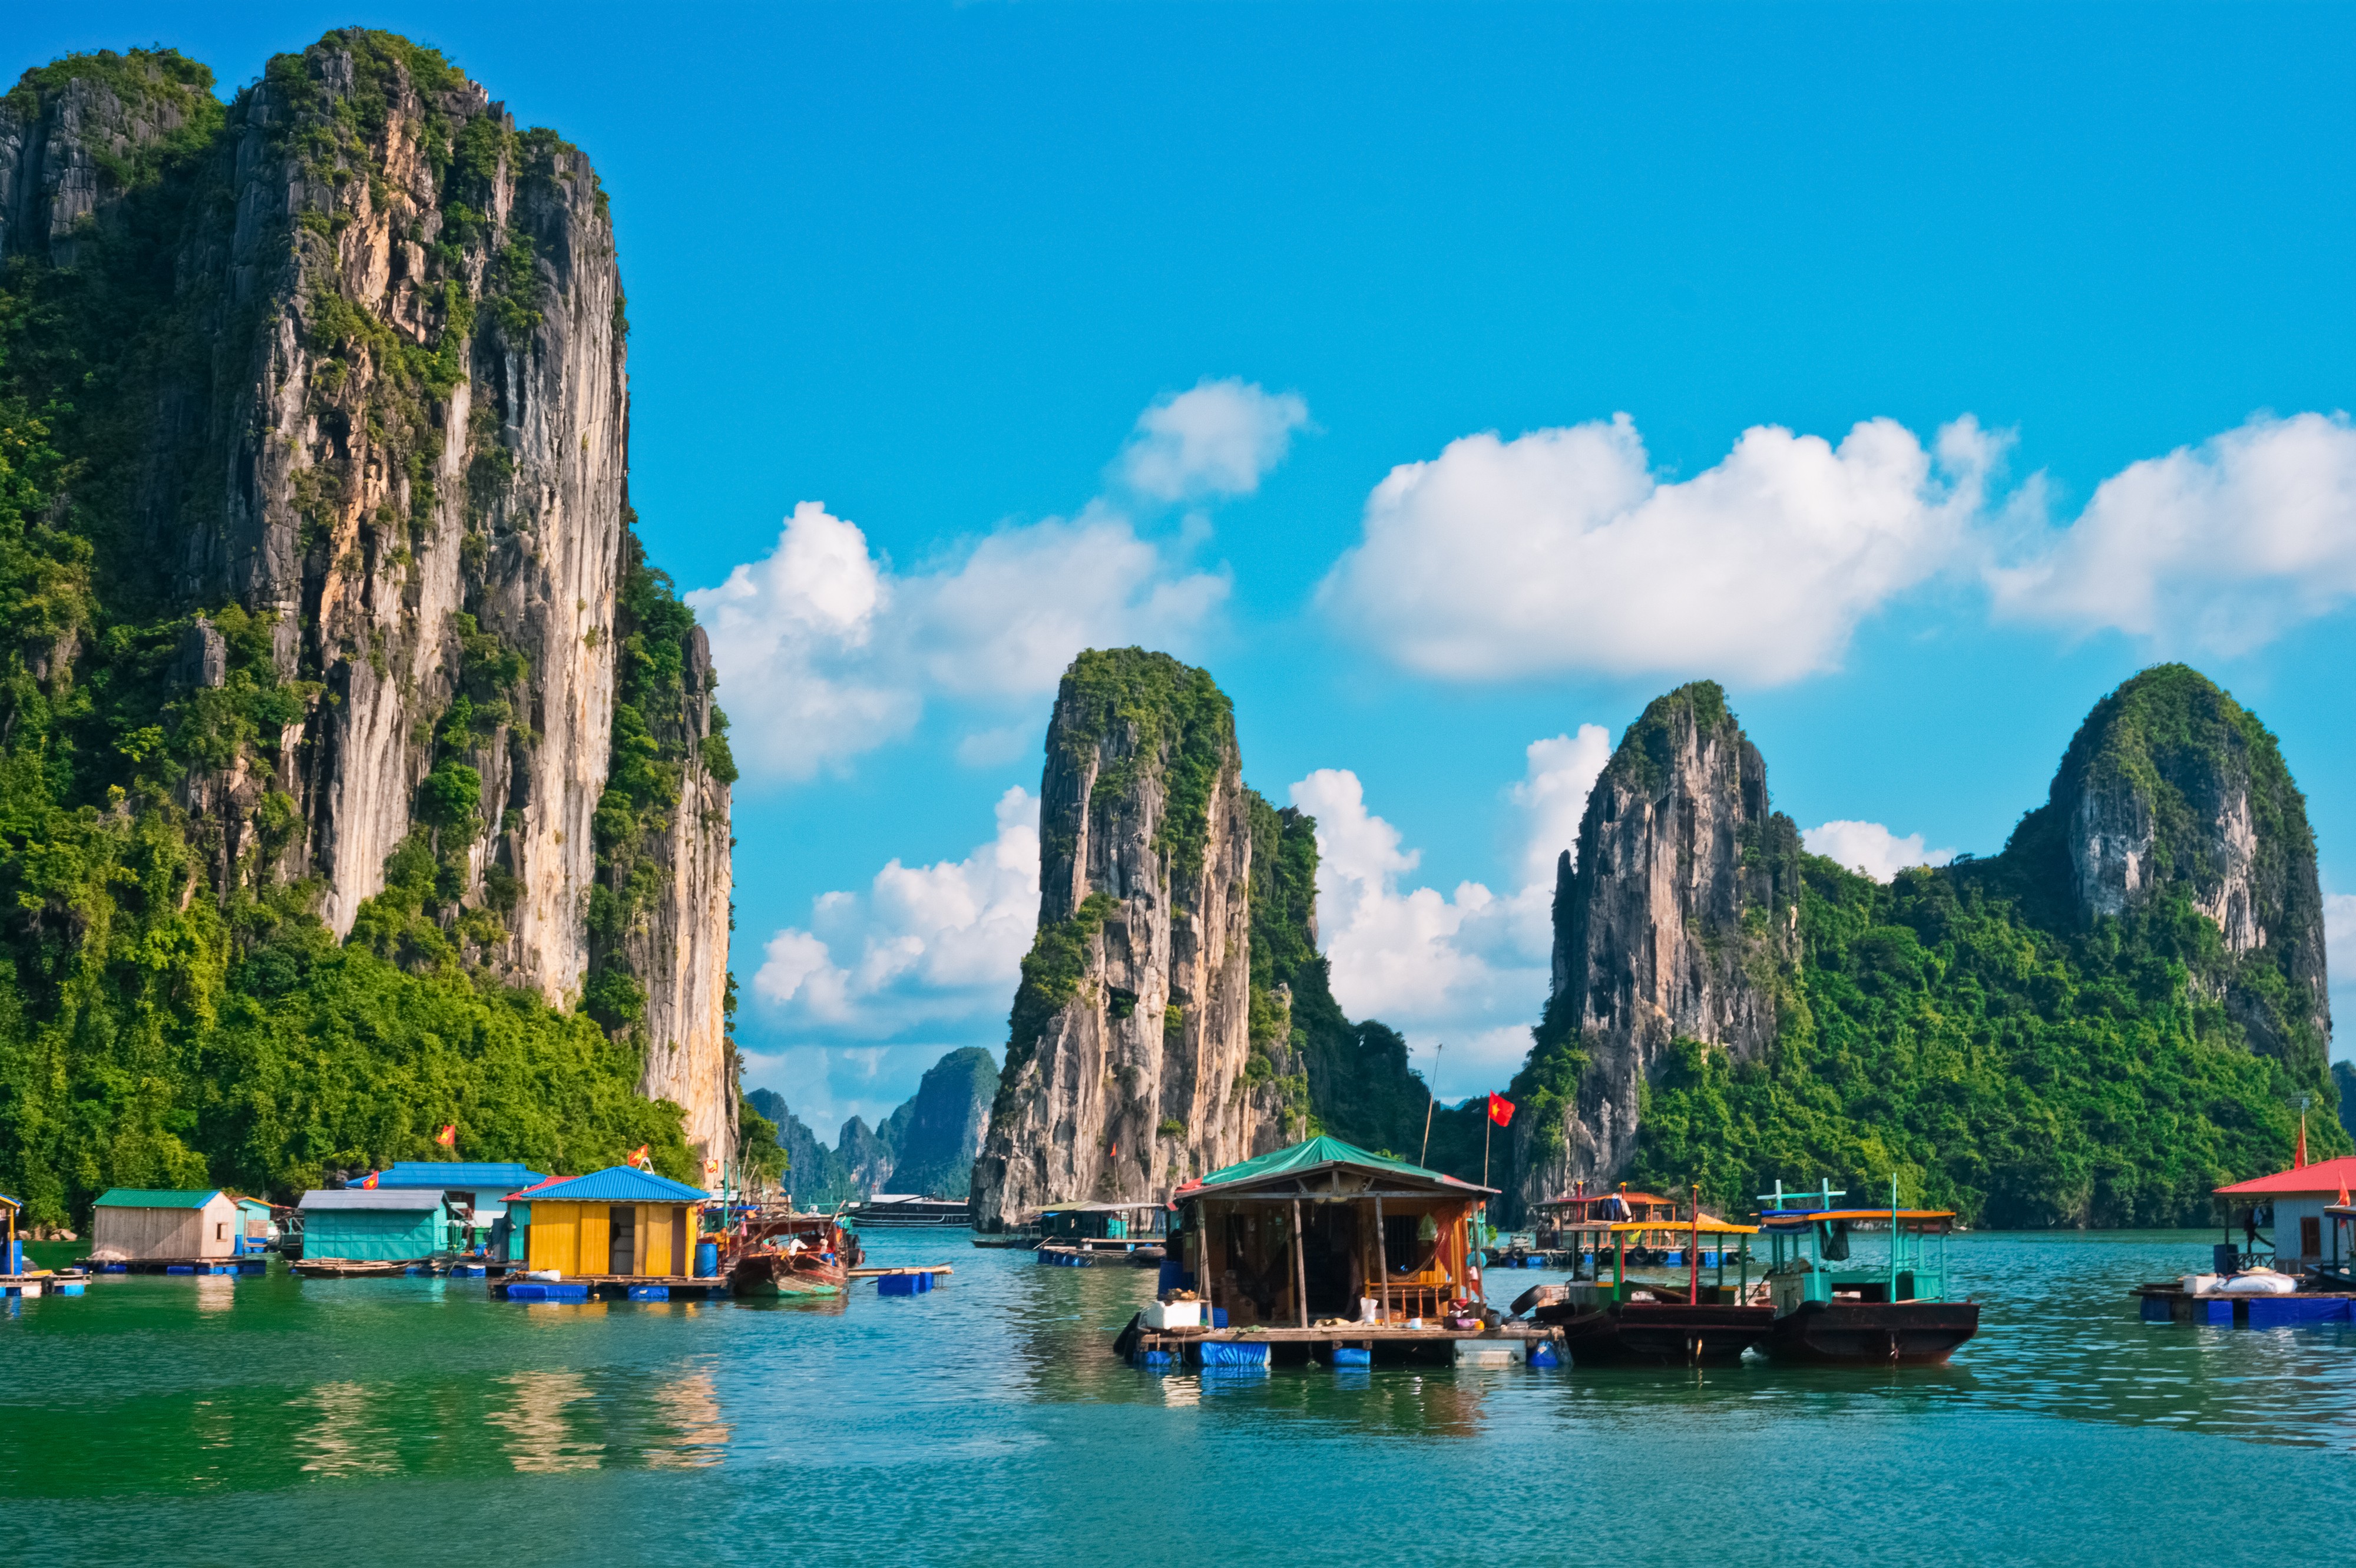 Floating fishing villages are among the special attractions in Halong Bay.